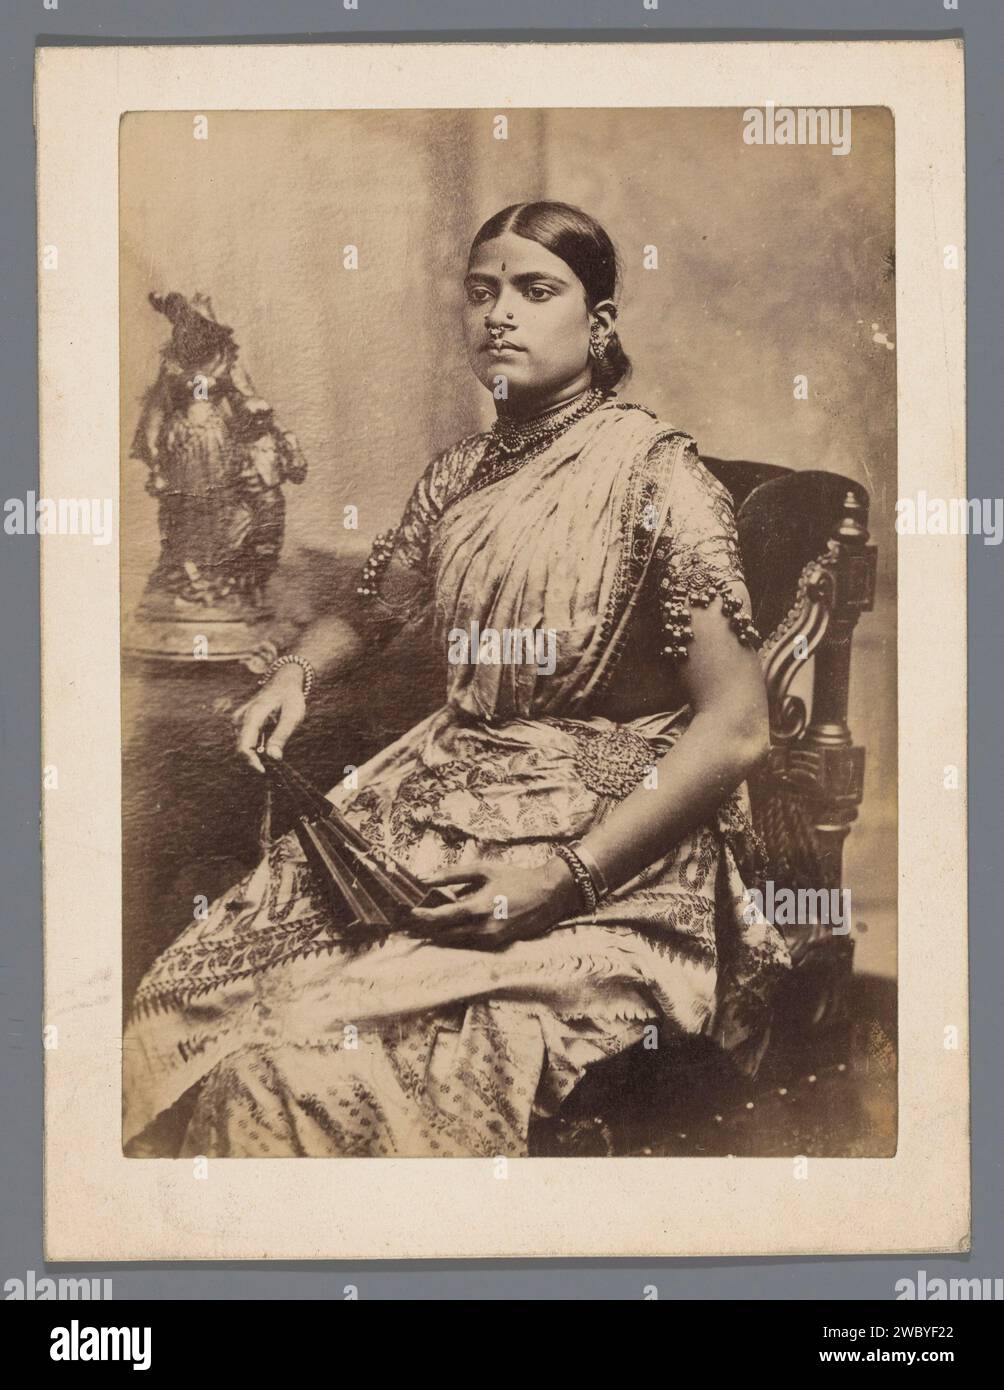 Portrait of an unknown Indian woman, anonymous, 1860 - 1890 photograph  British India paper. cardboard albumen print adult woman. folk costume, regional costume. anonymous historical person portrayed British India Stock Photo